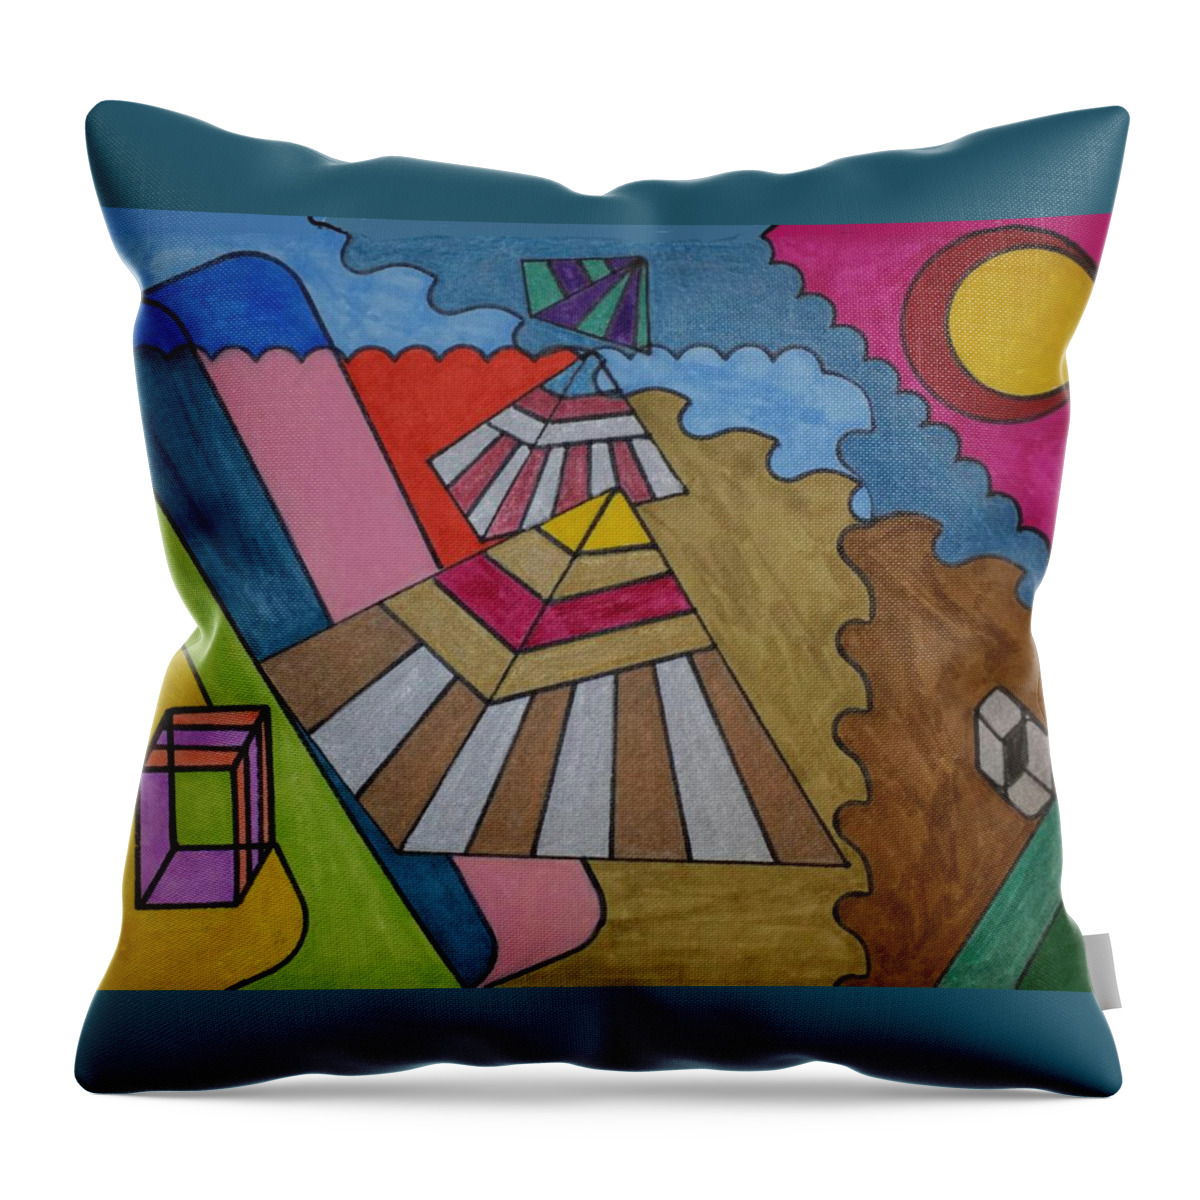 Geometric Art Throw Pillow featuring the glass art Dream 122 by S S-ray